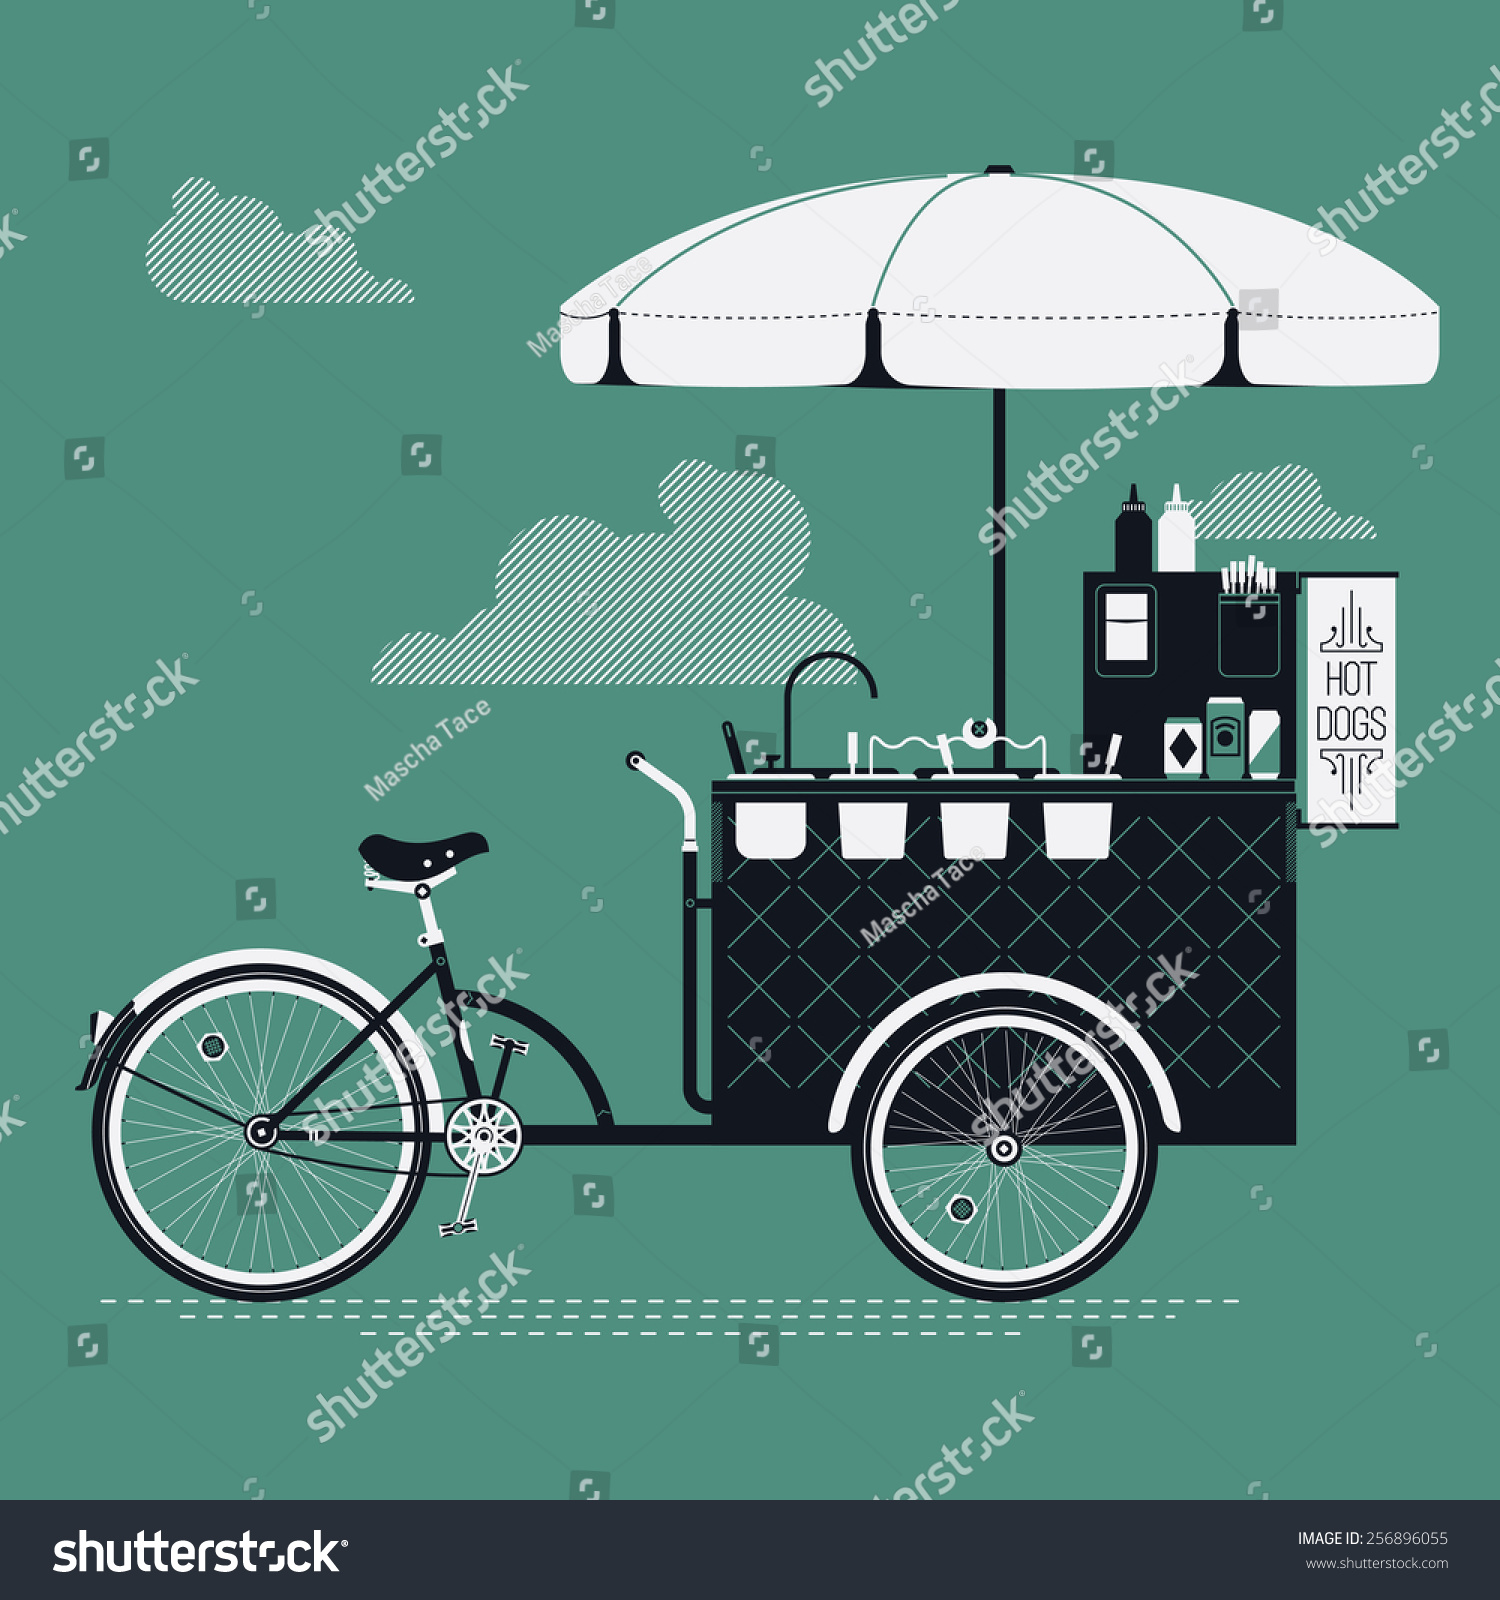 SVG of Cool detailed vector street food bicycle cart creative illustration | Mobile retro bike powered hot dog stand with parasol sunshade, topping containers, ketchup and mustard bottles and more svg